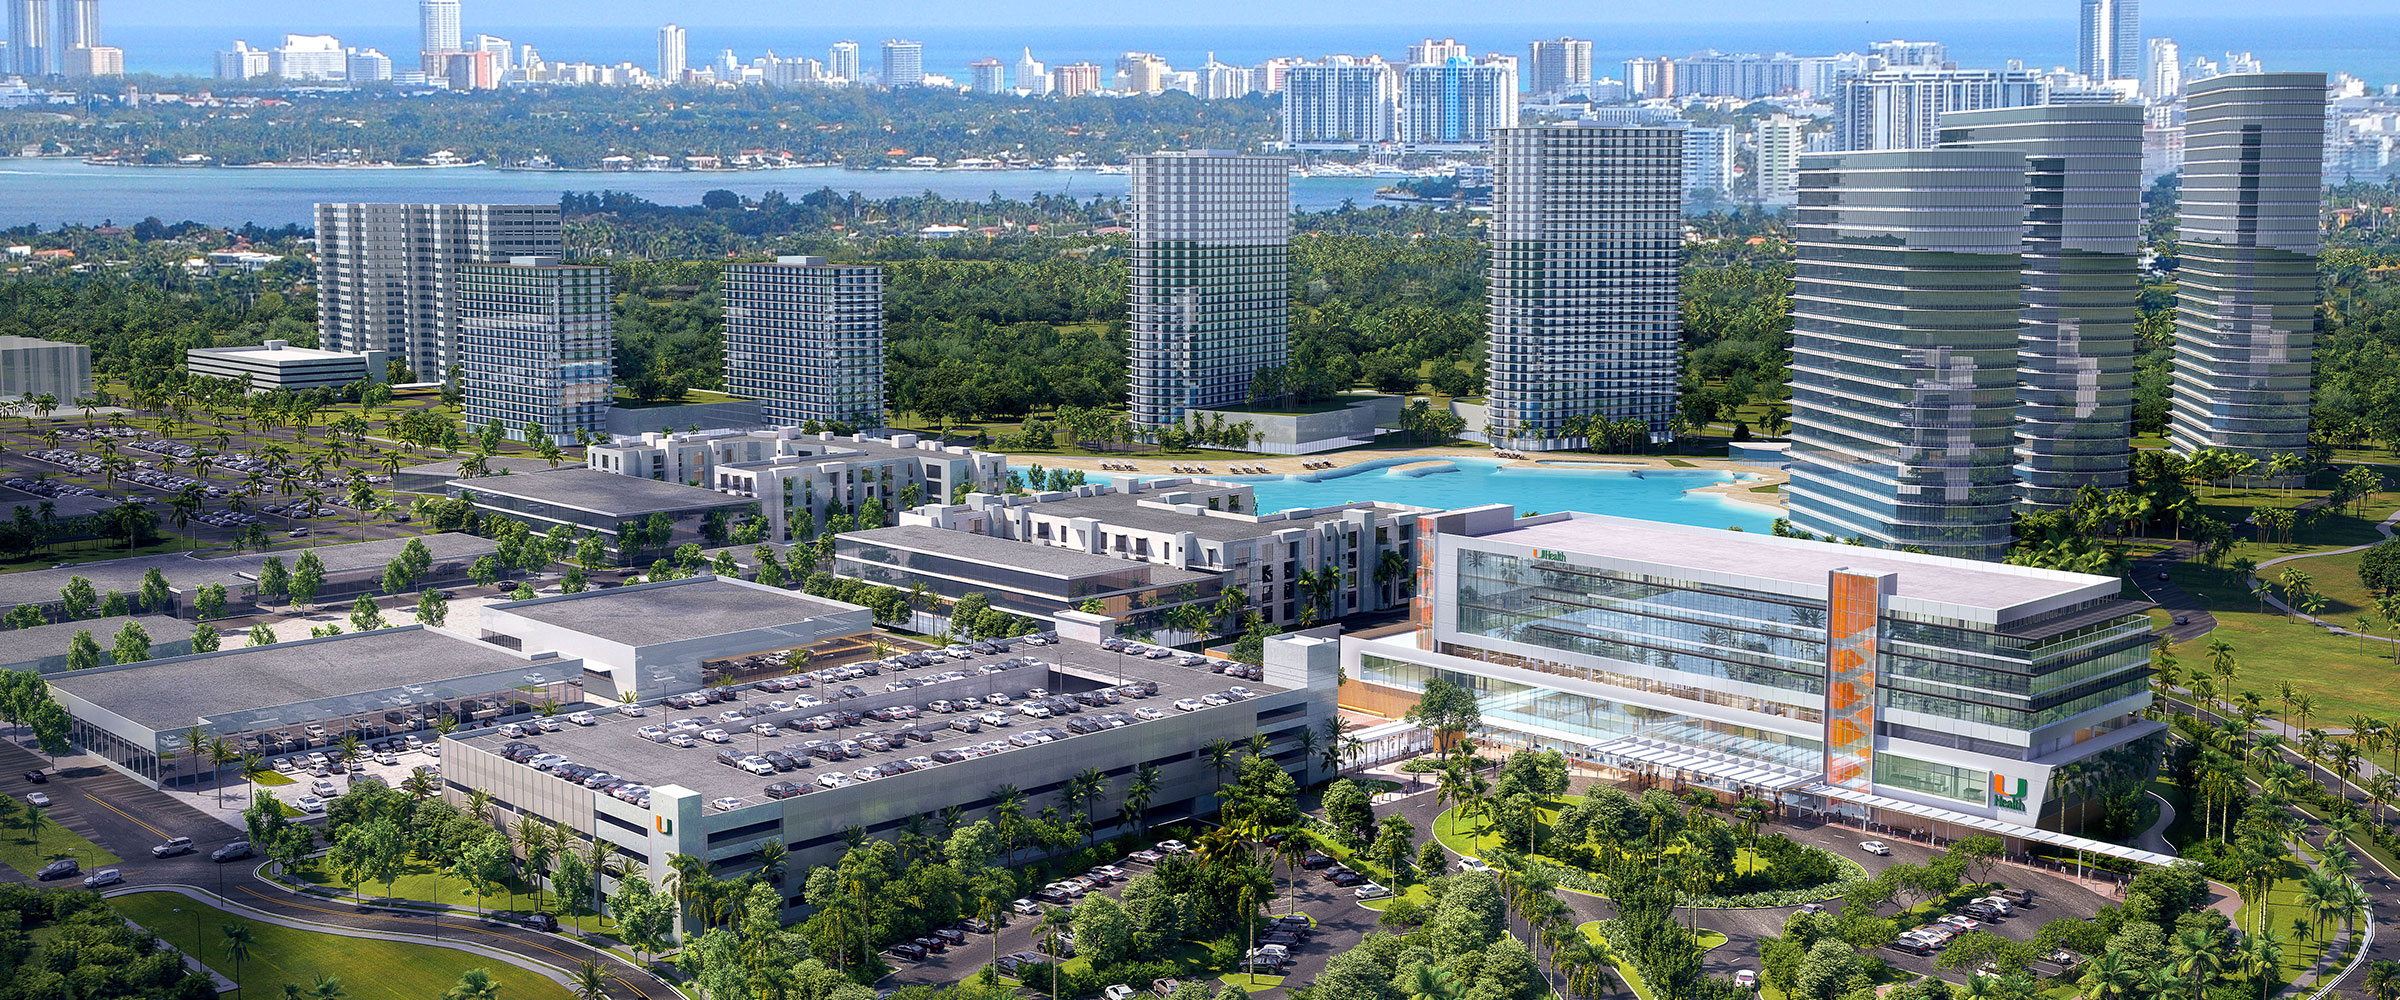 Aerial Architectural Rendering of UHealth at SoLé Mia in Aventura